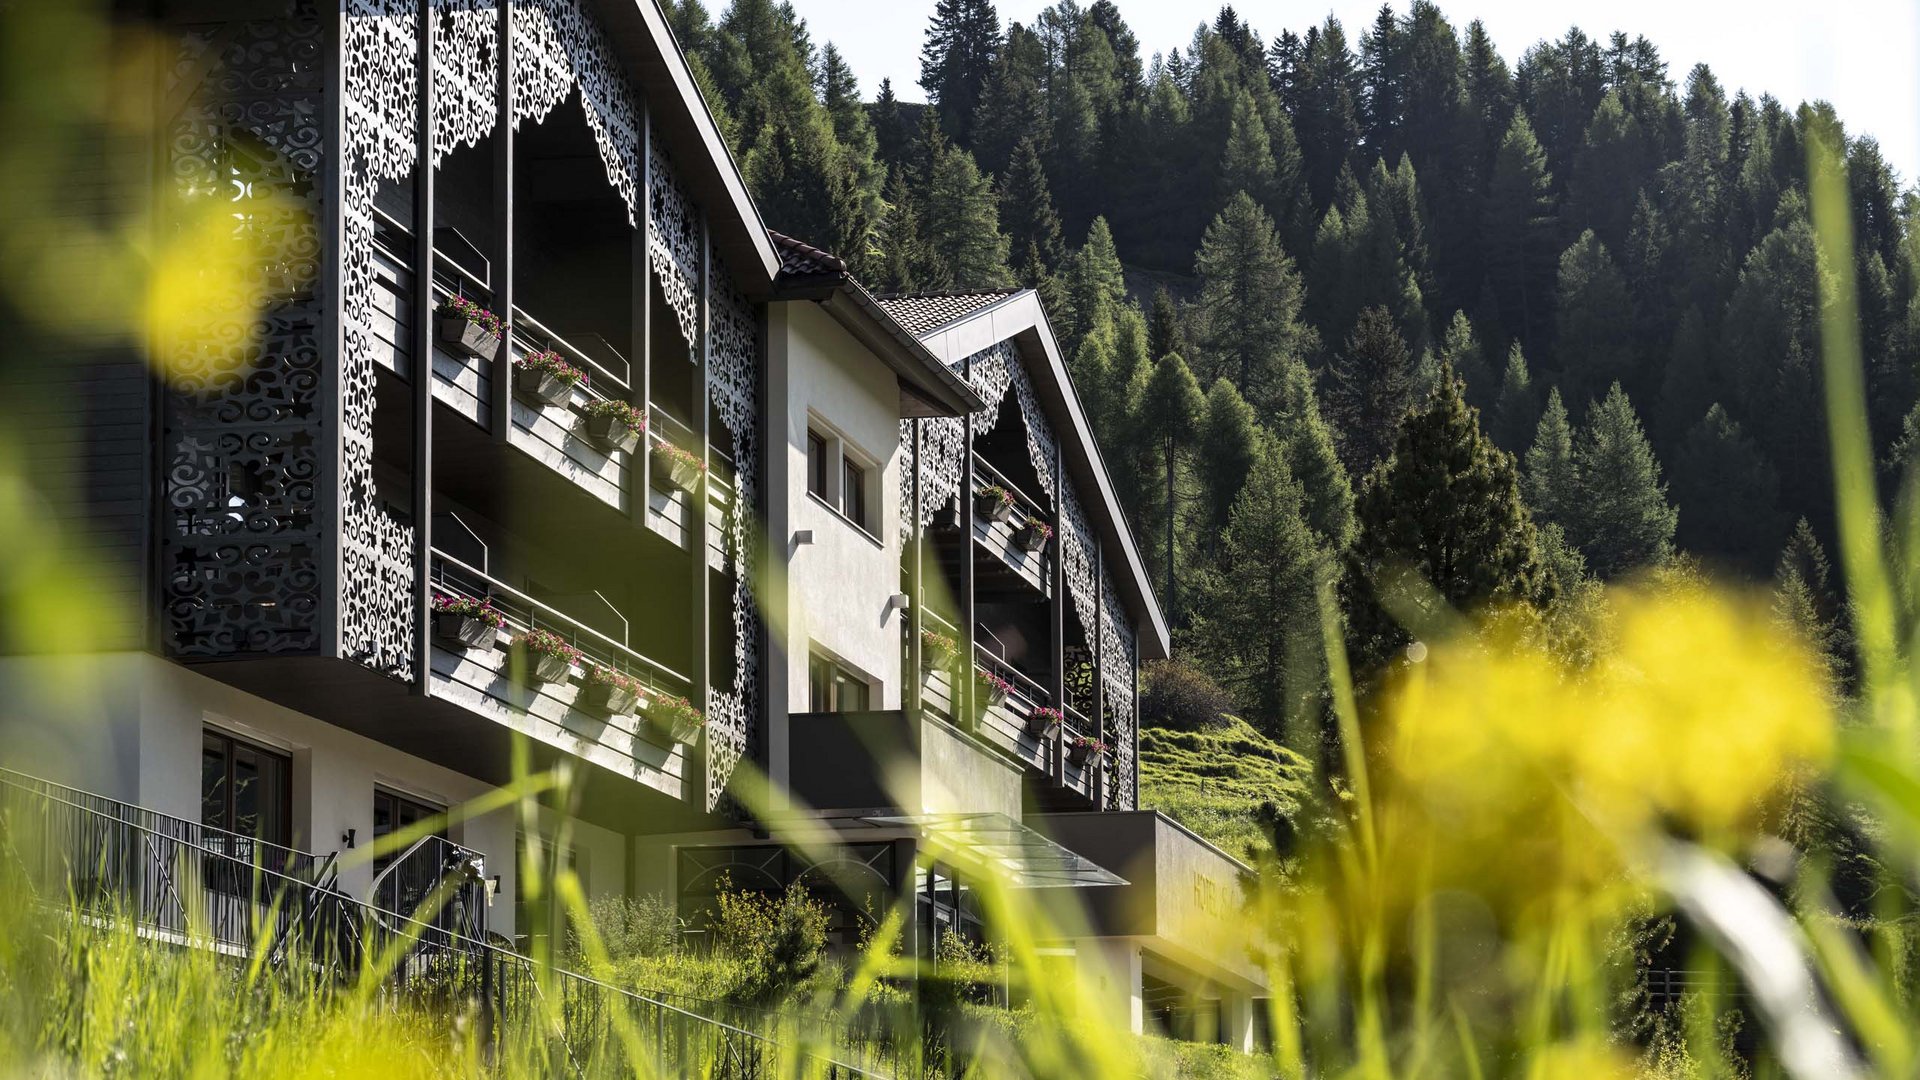 Hotel Schmung: holidays in harmony with nature